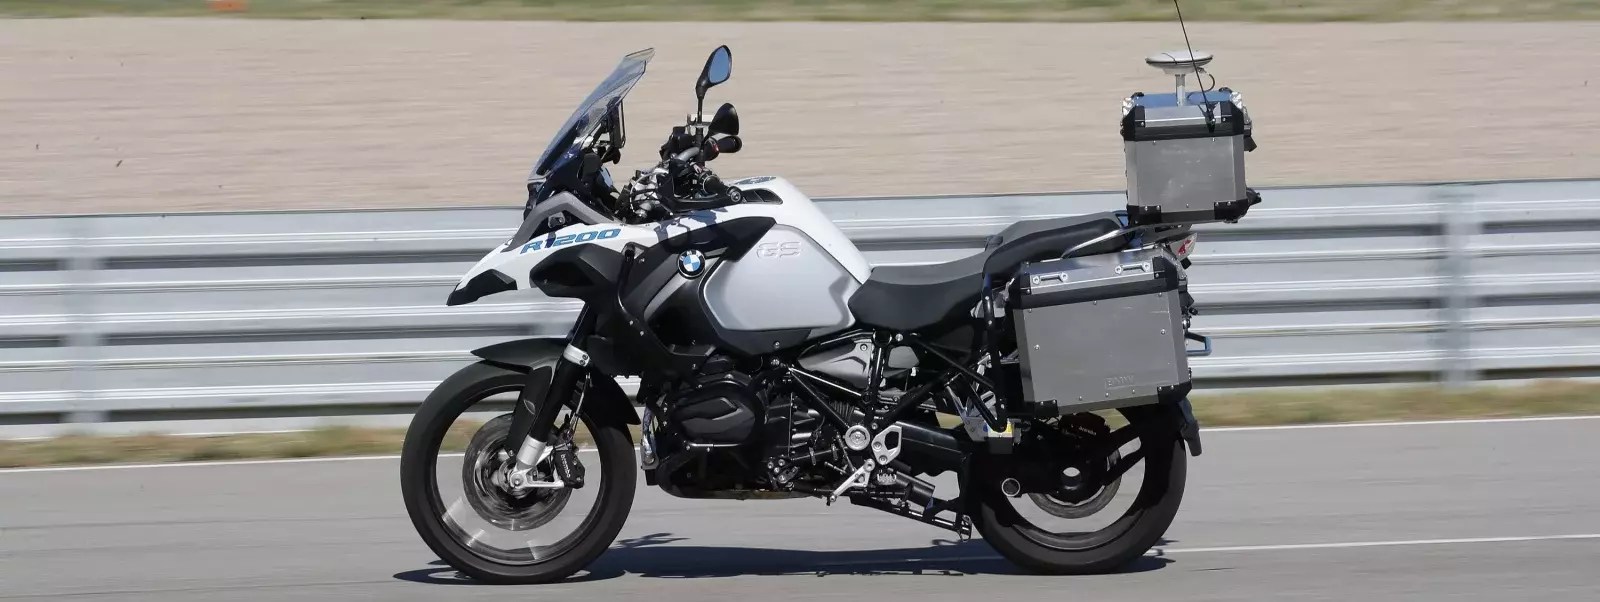 BMW R1200 Driverless Motorcycle